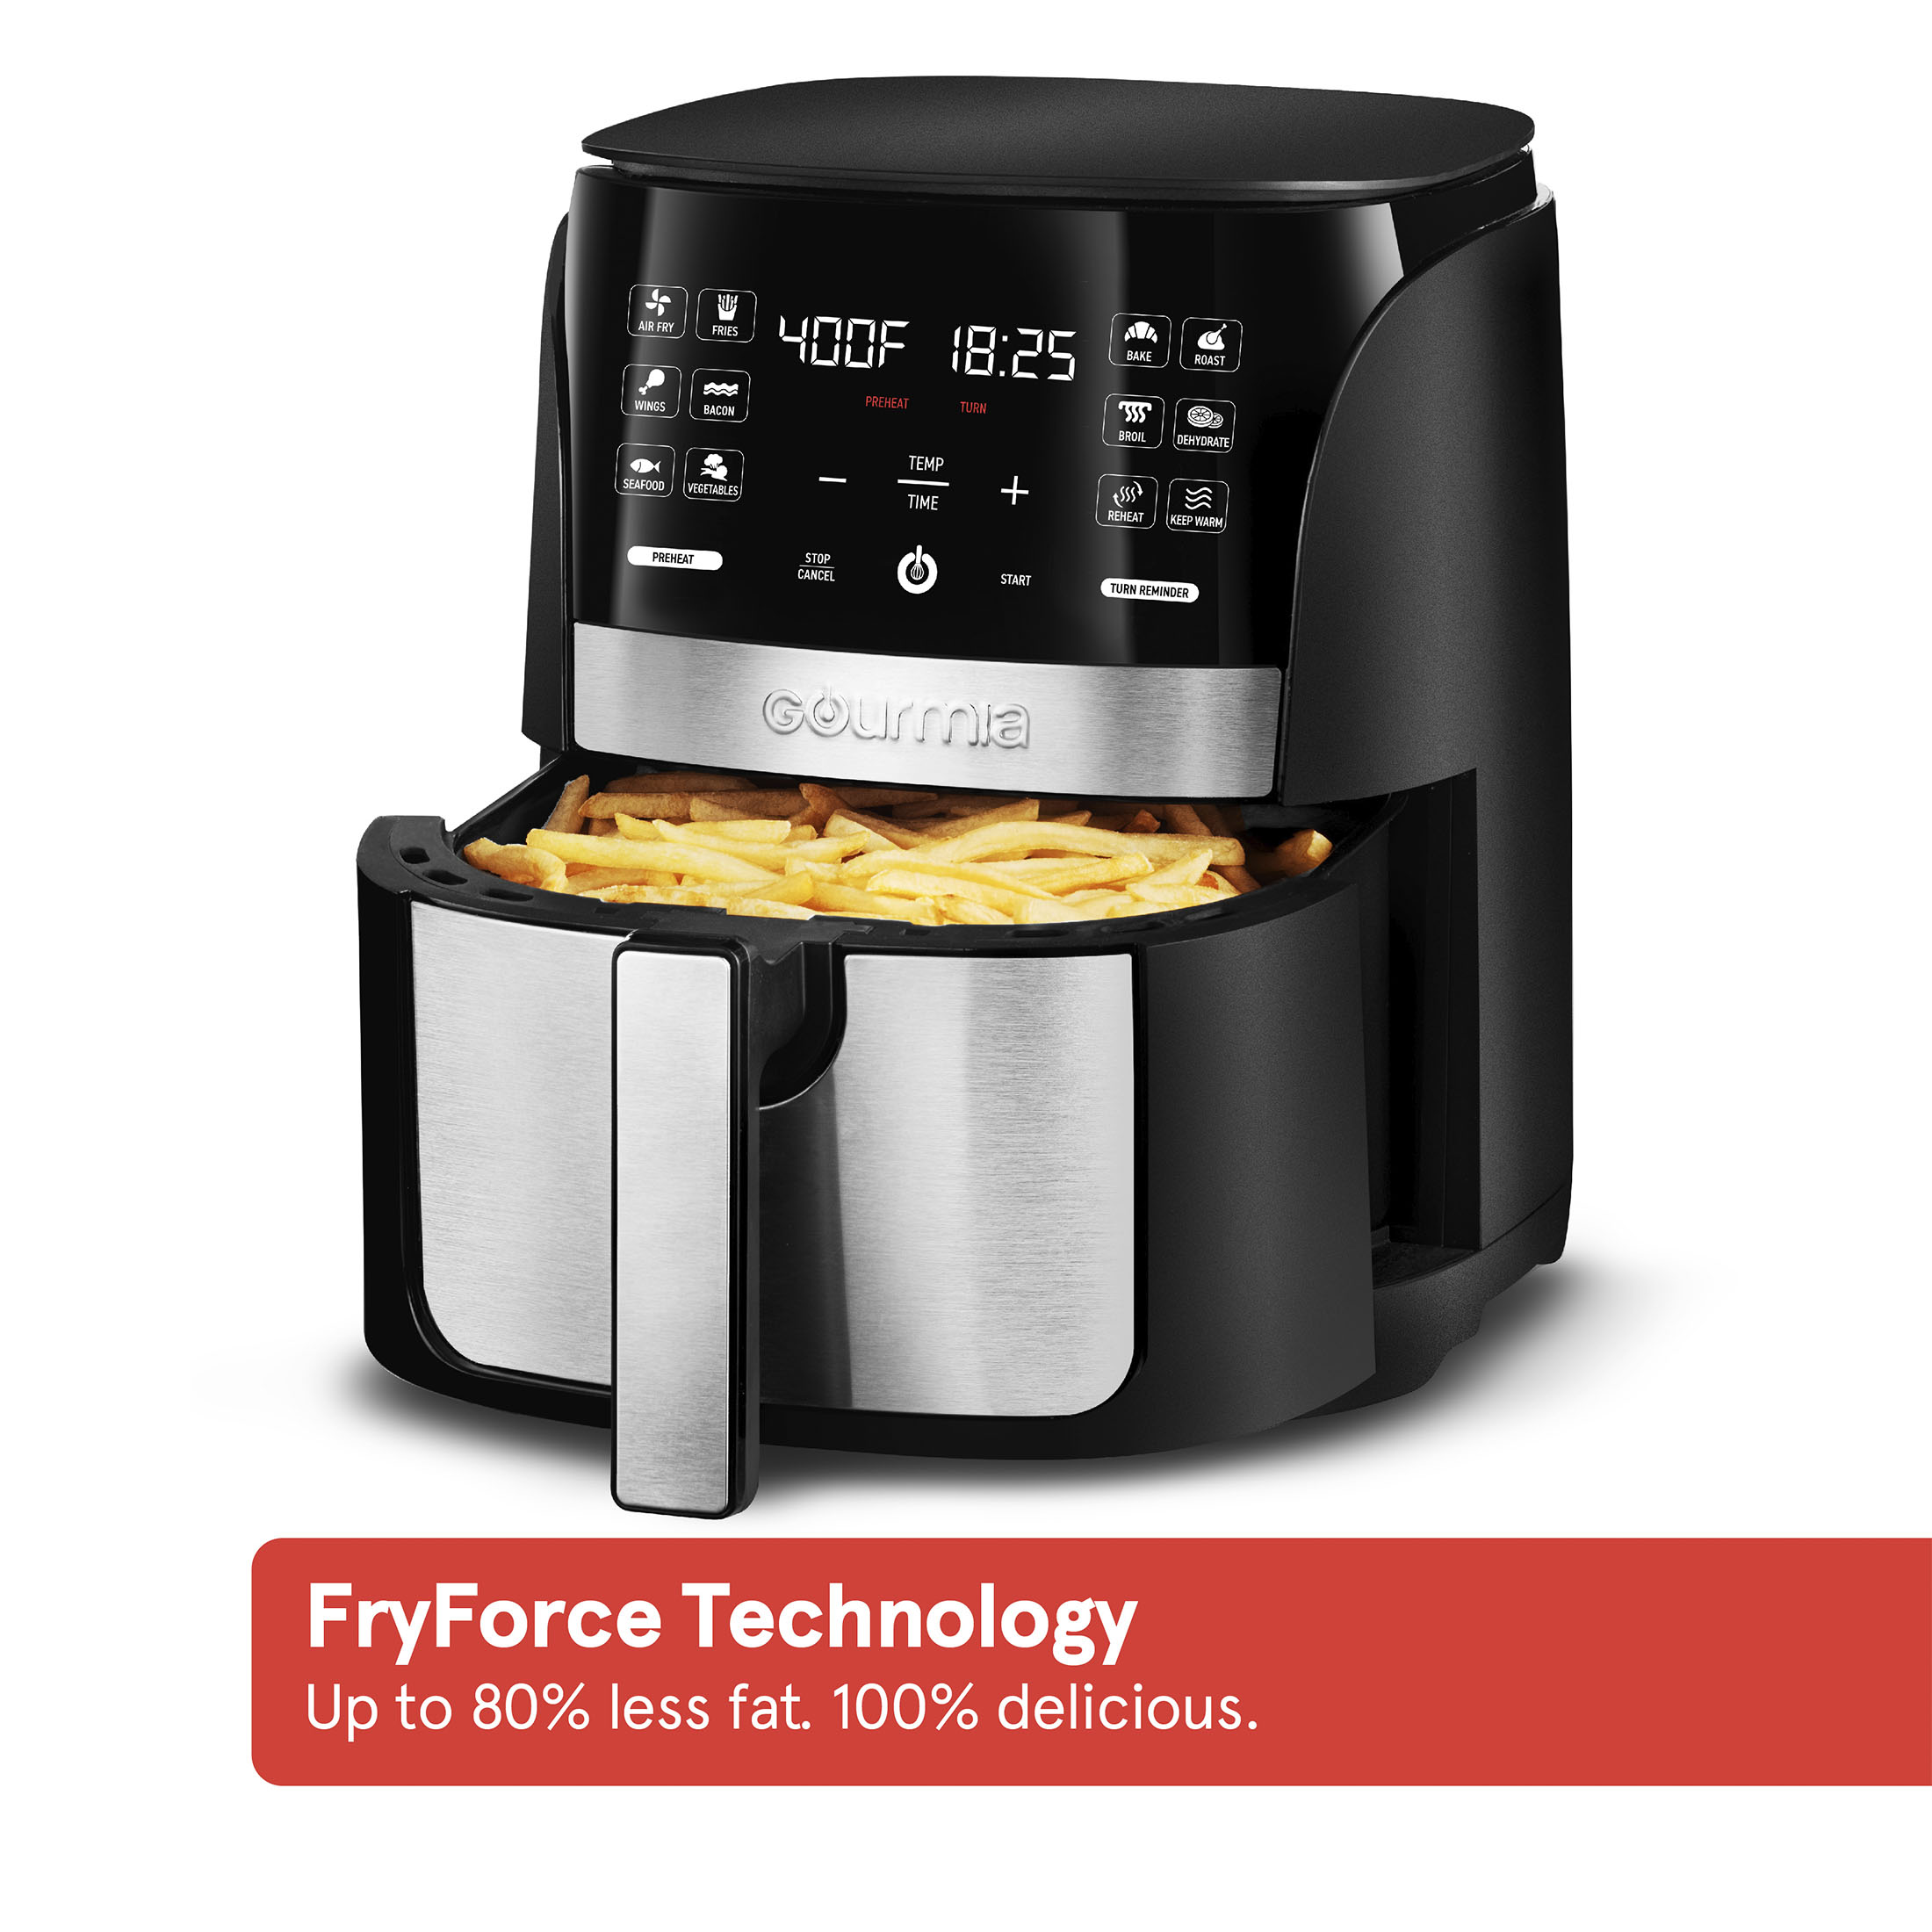 Gourmia 6 Qt Digital Air Fryer with Guided Cooking and 12 One-Touch Cooking Functions, 13.58 H, New - image 4 of 9